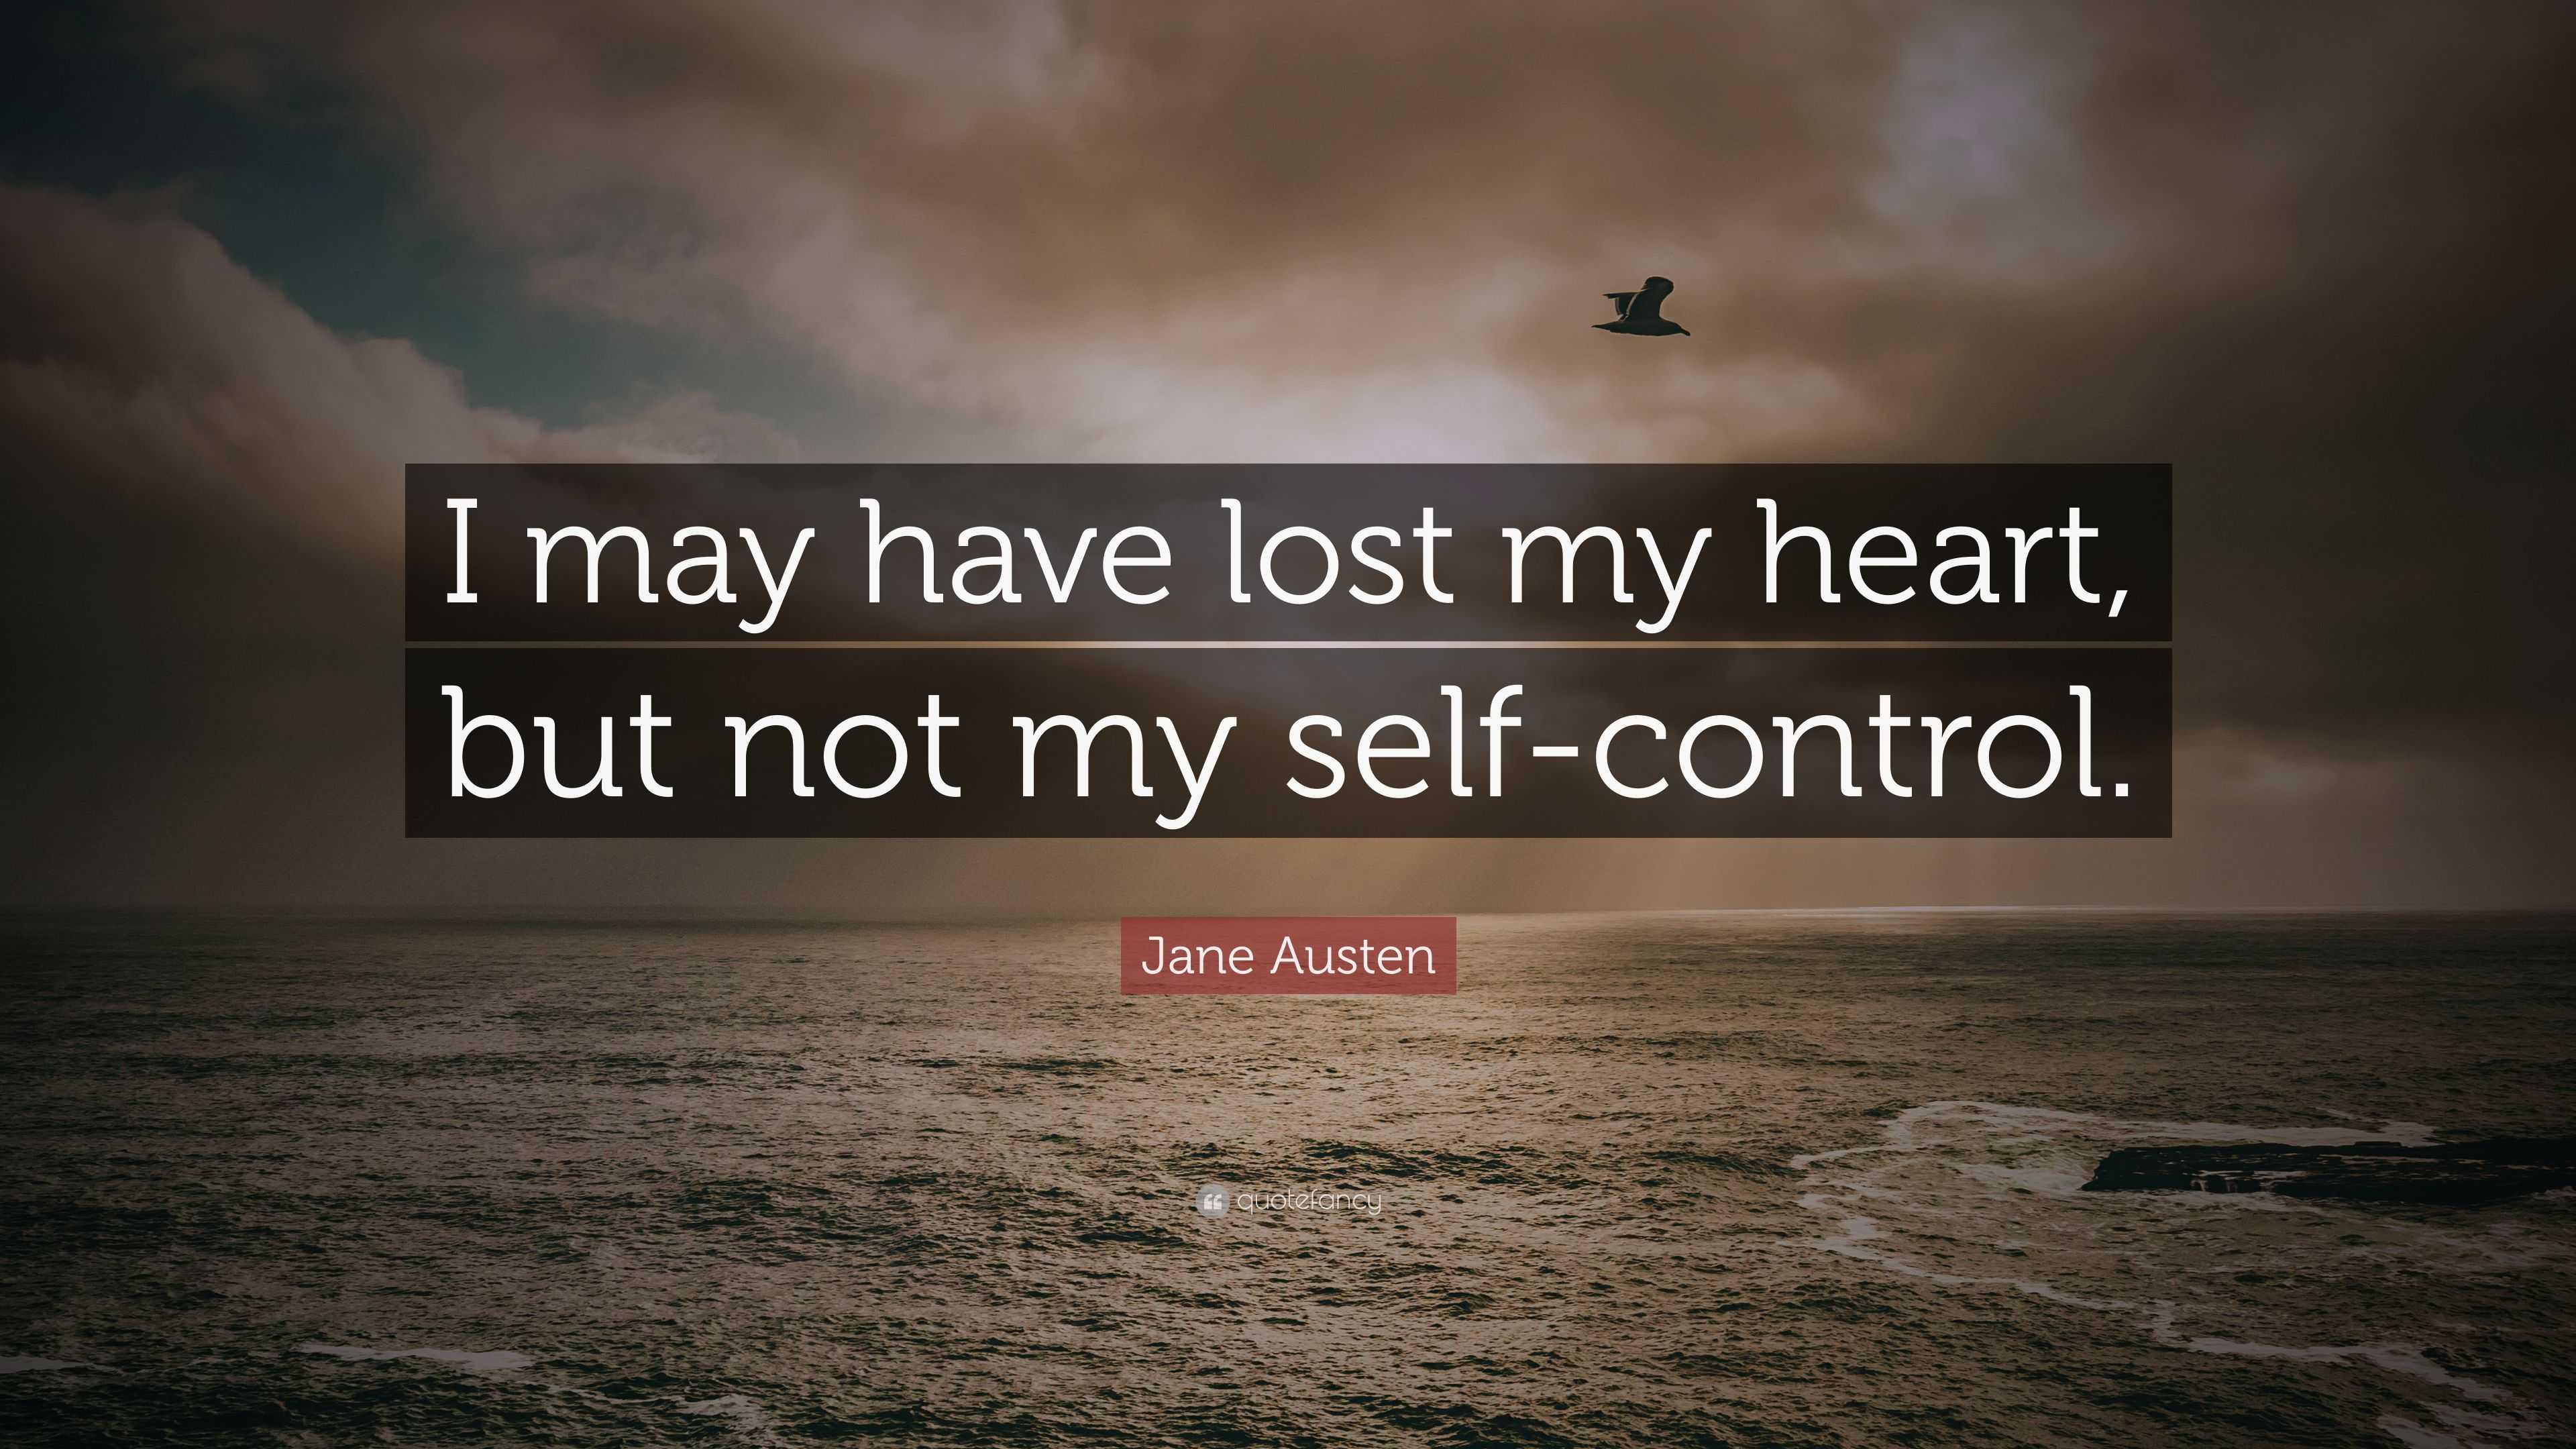 Jane Austen Quote: "I may have lost my heart, but not my ...